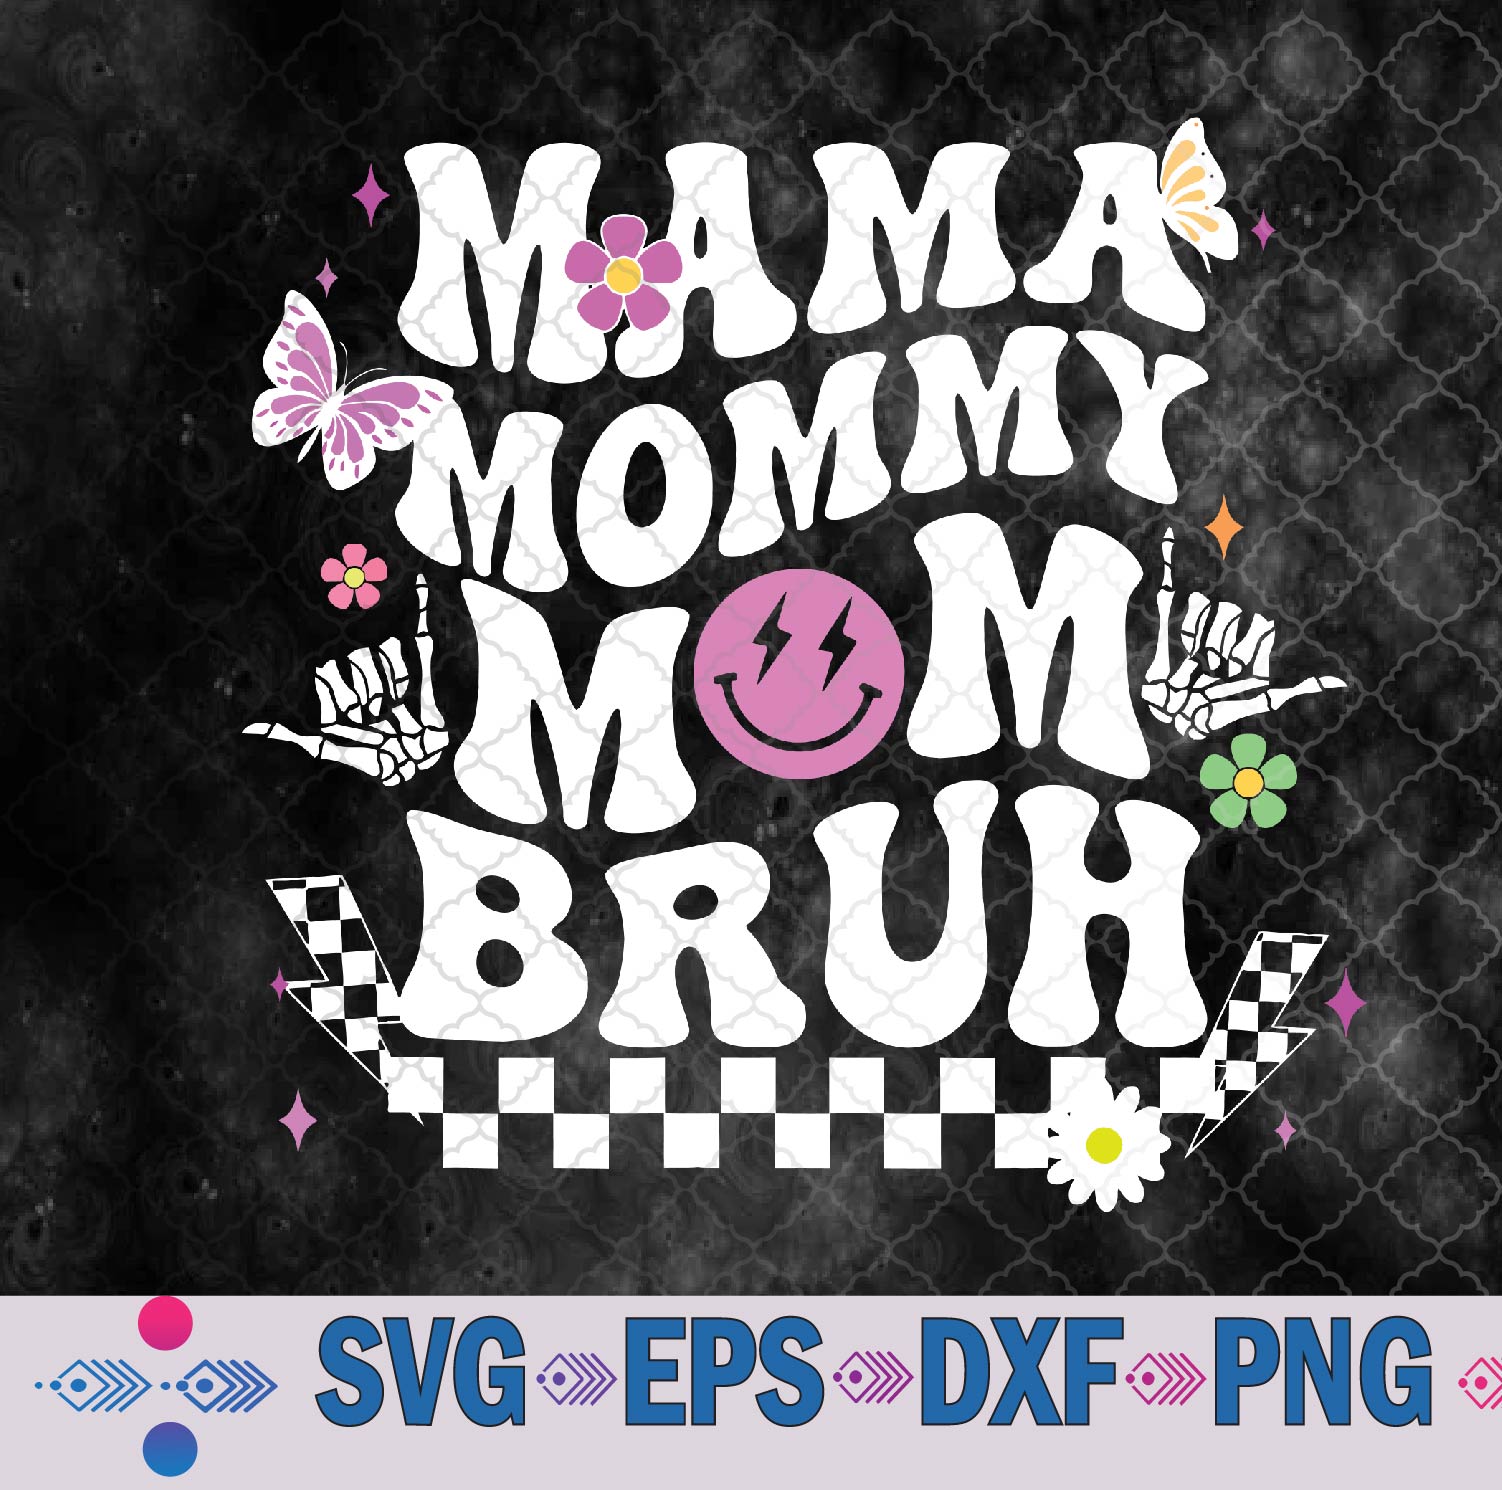 WTMNEW9file 09 320 Mama Mommy Mom Bruh Mothers Day Svg, Png, Digital Download